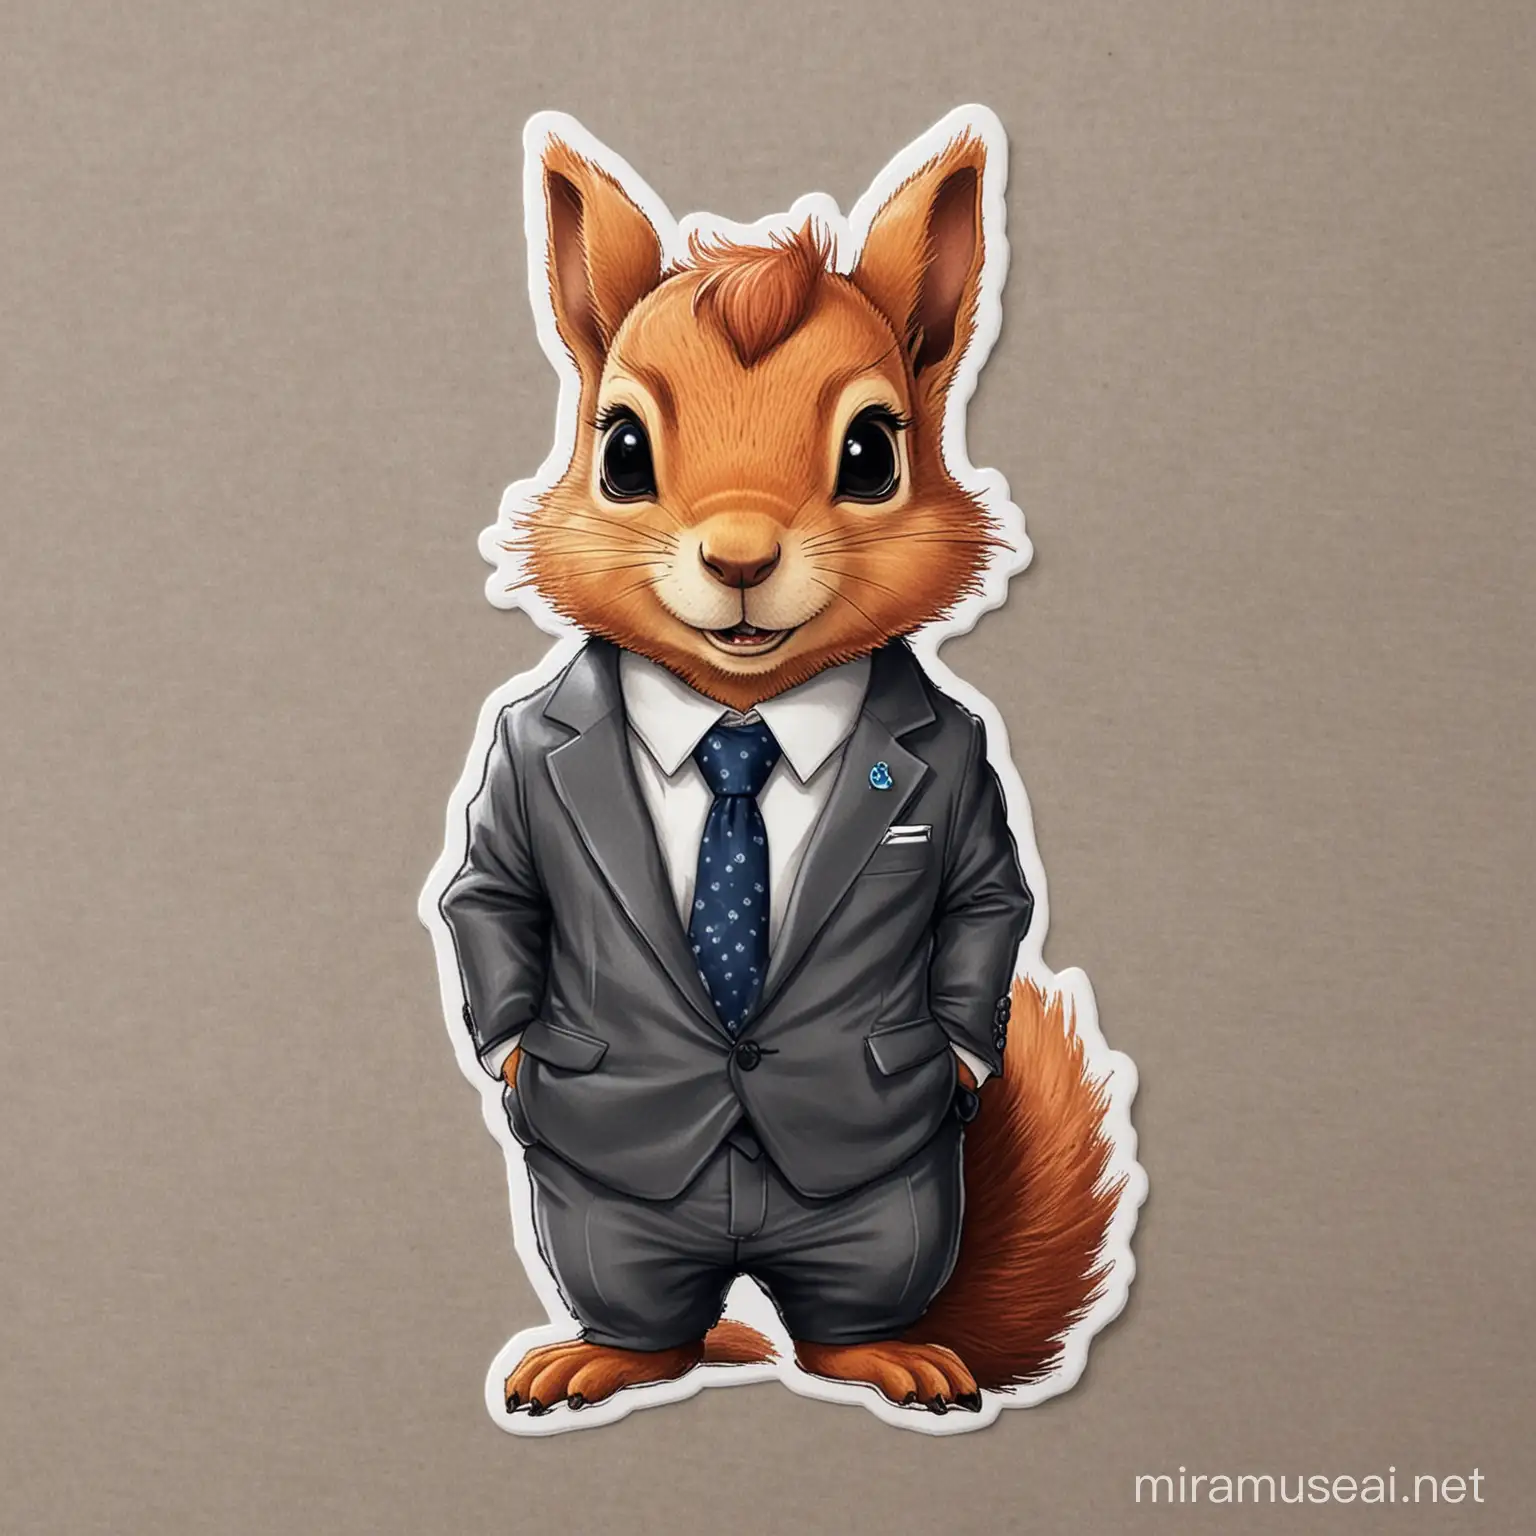 Dapper Squirrel Sticker Stylish Rodent in Suit and Tie